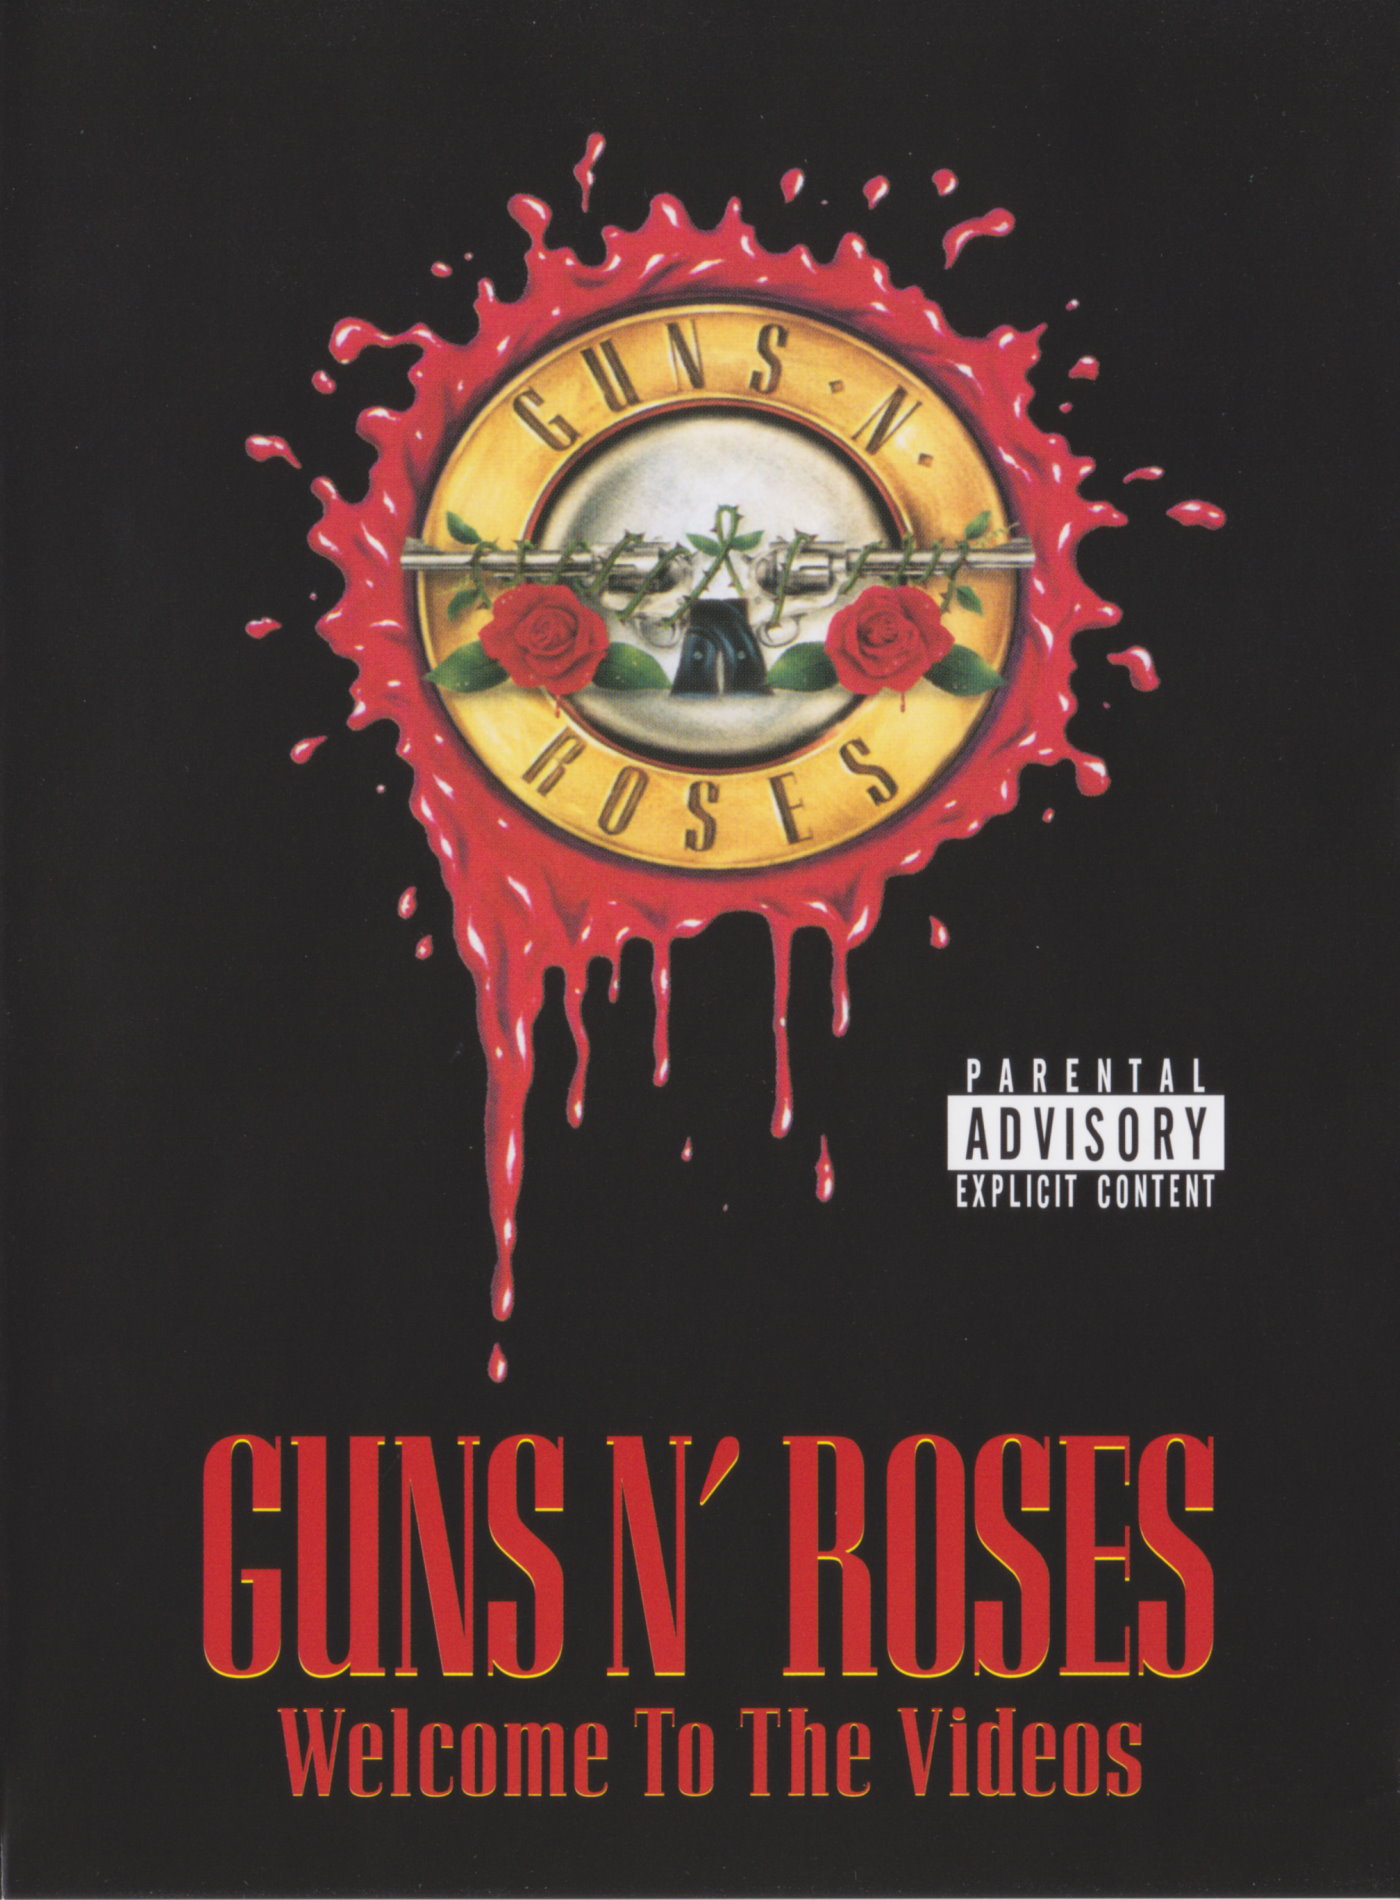 Cover - Guns N' Roses - Welcome to the Videos.jpg